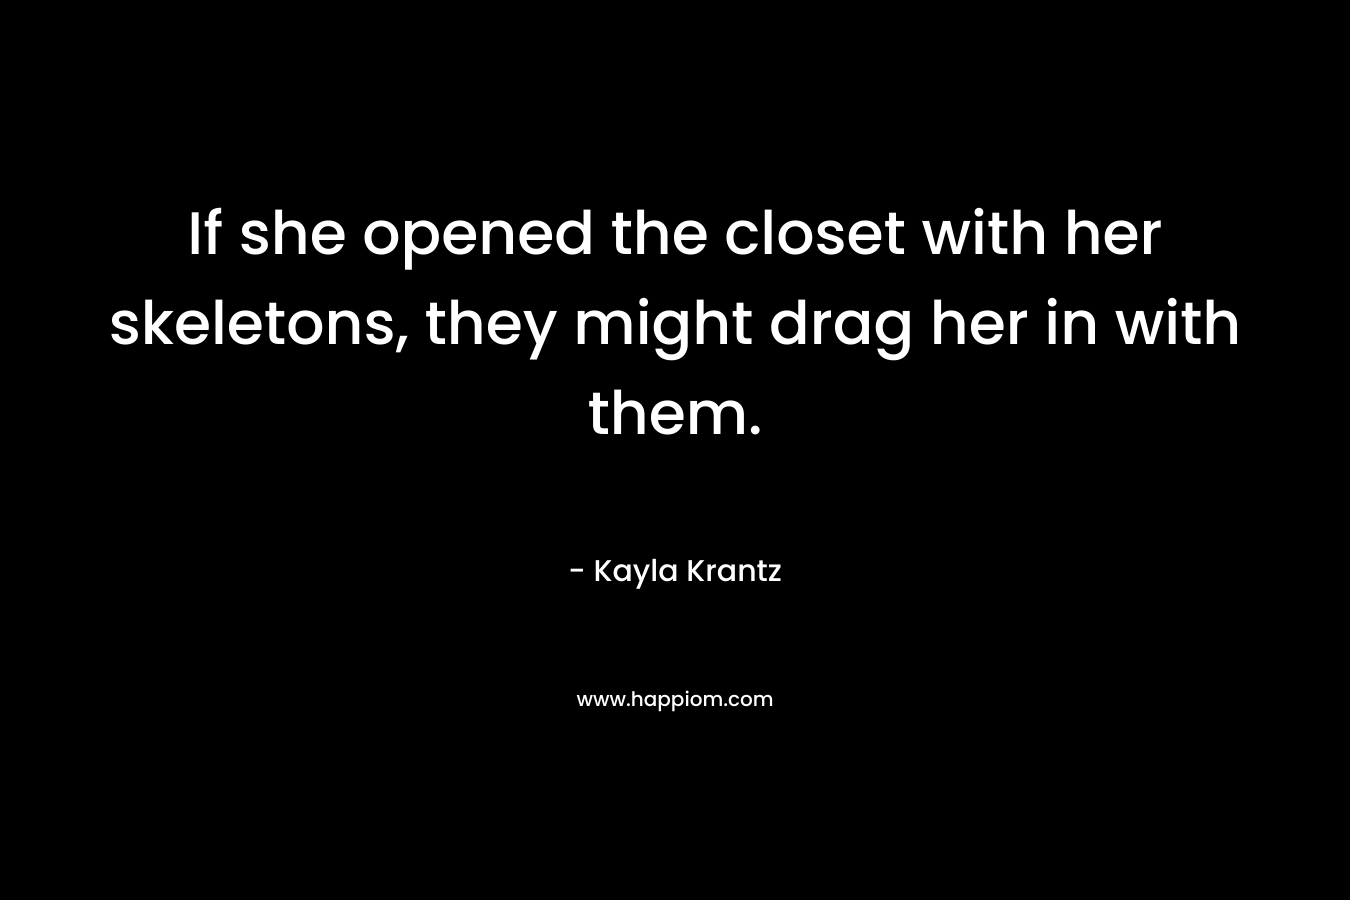 If she opened the closet with her skeletons, they might drag her in with them. – Kayla Krantz